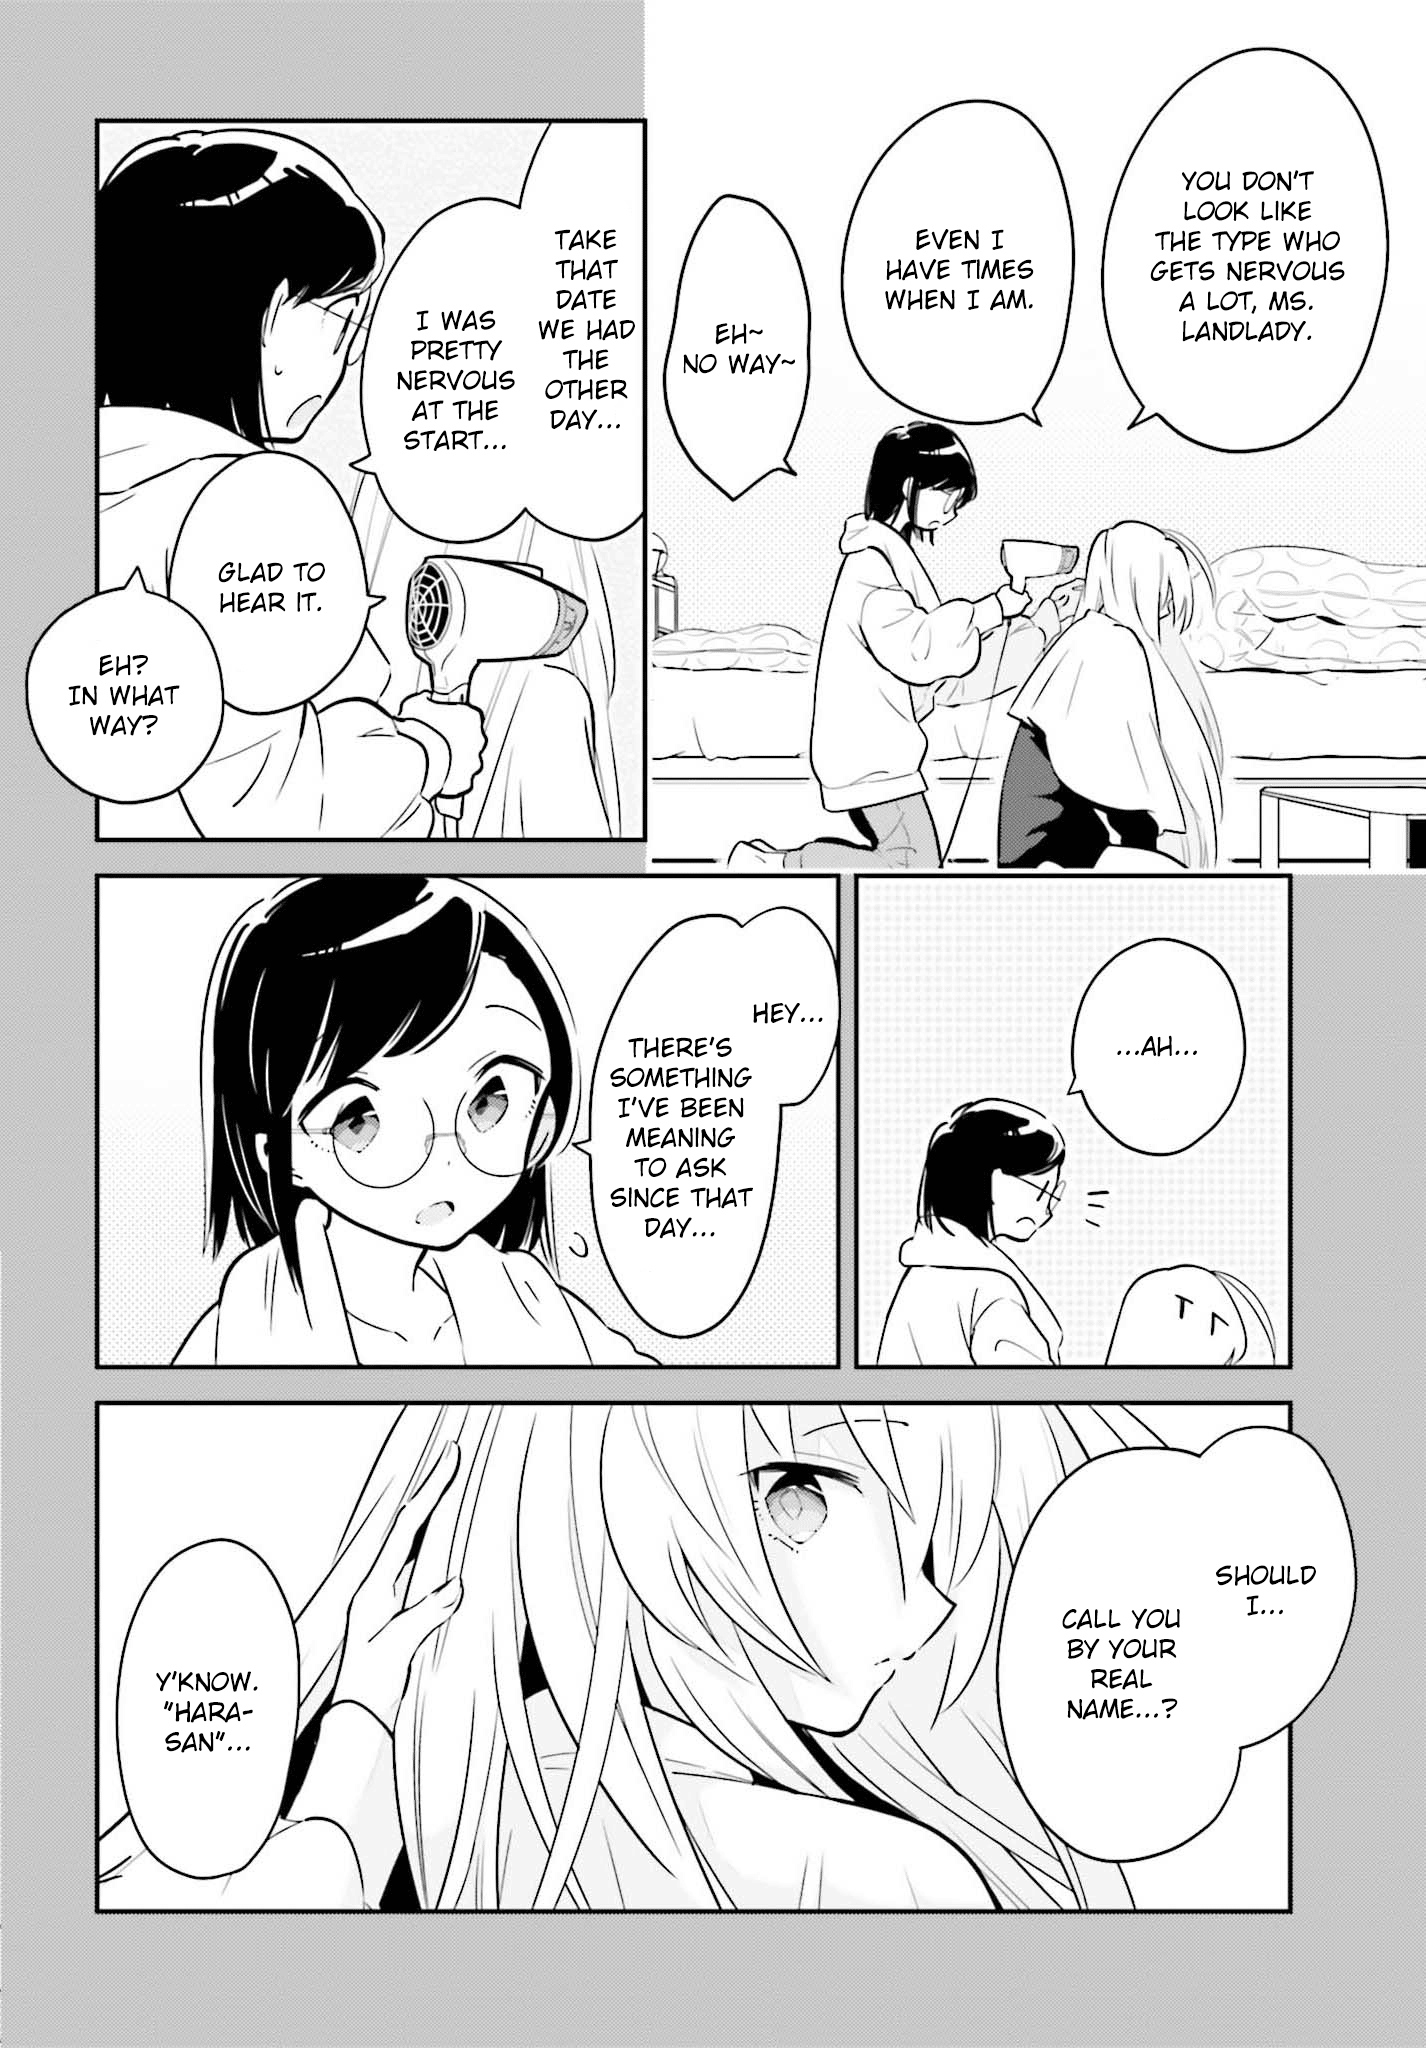 Even If It Was Just Once, I Regret It - Page 2